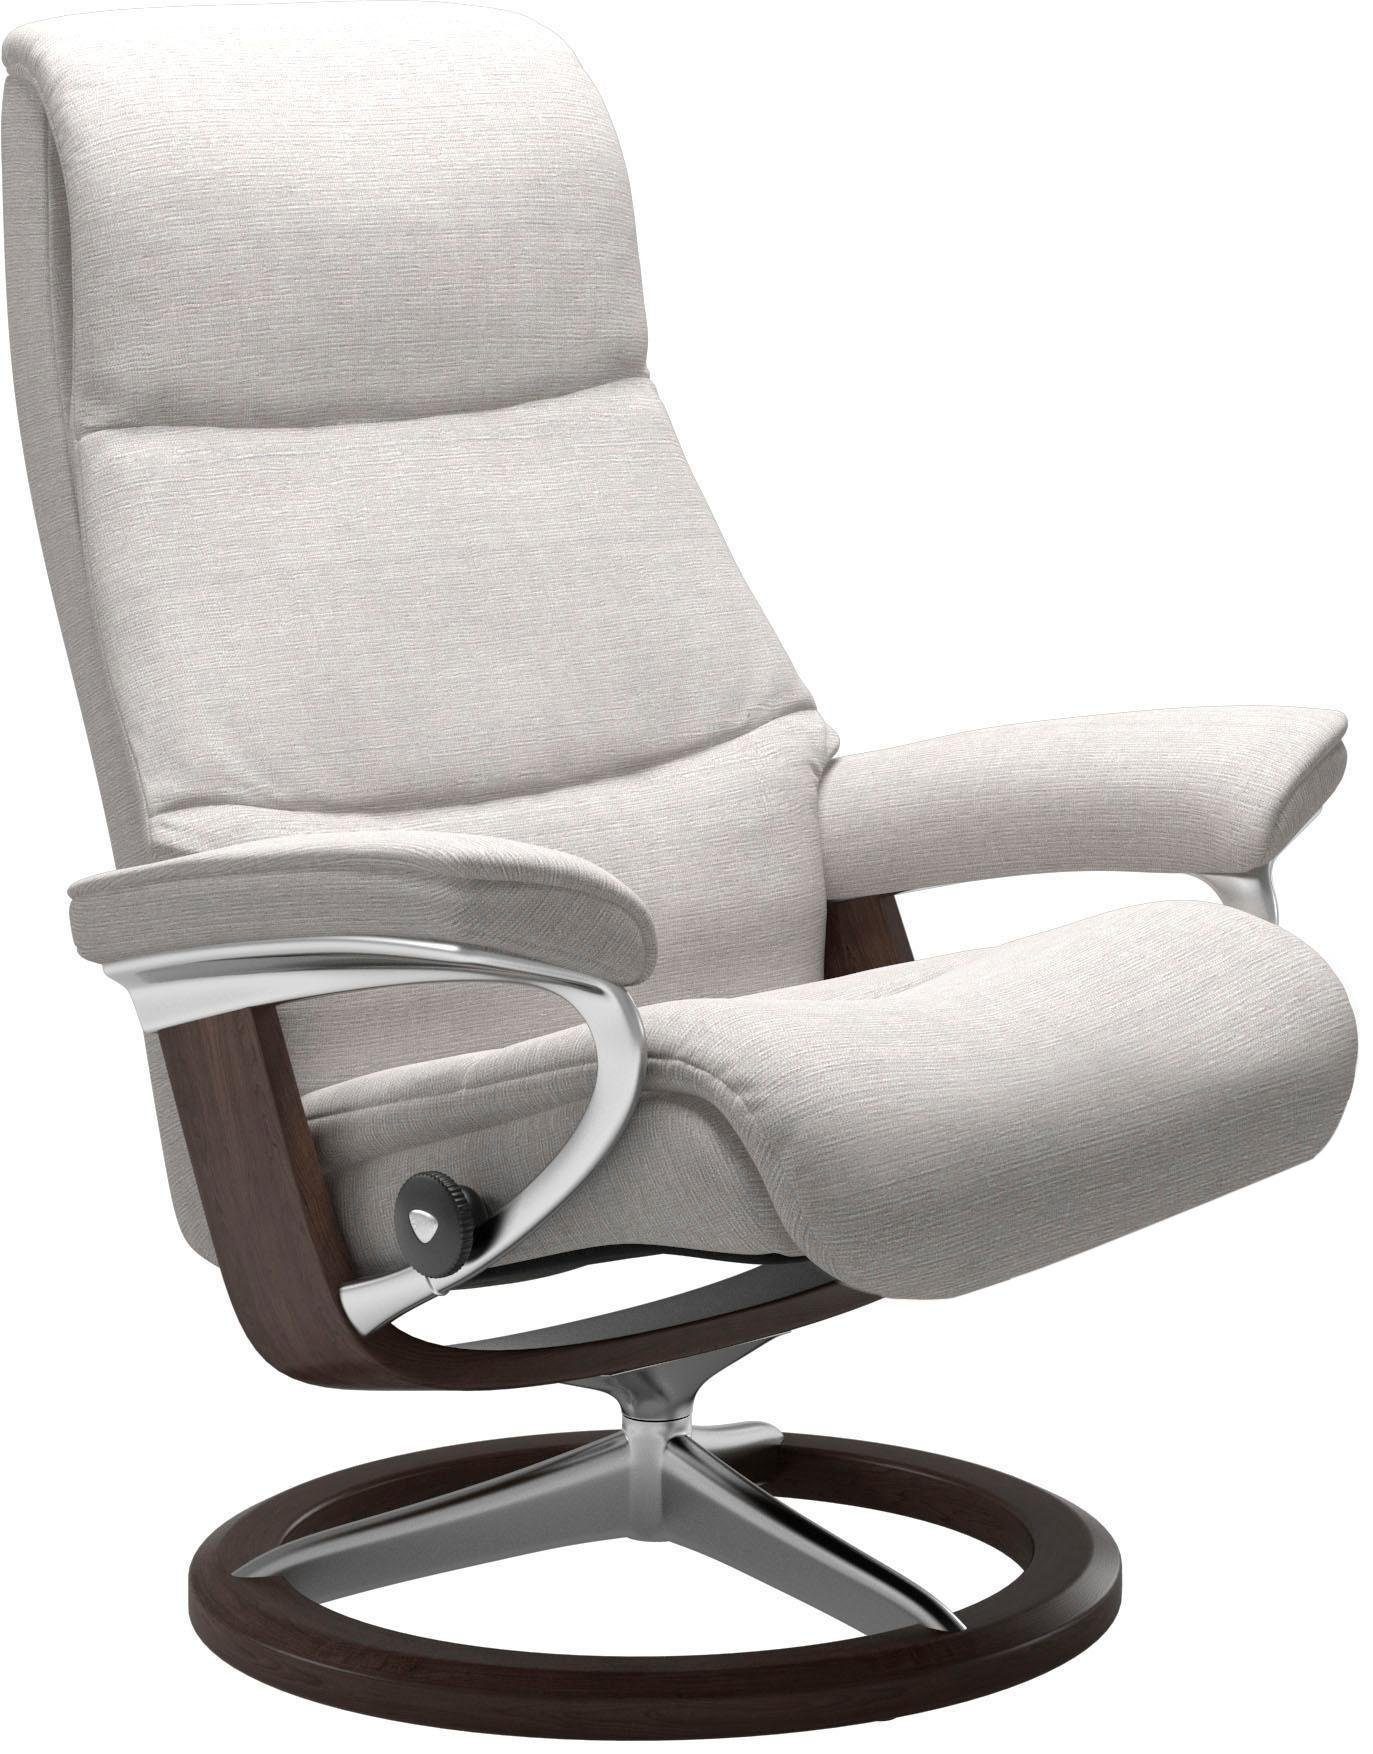 L,Gestell View, Signature Größe Relaxsessel Wenge mit Base, Stressless®